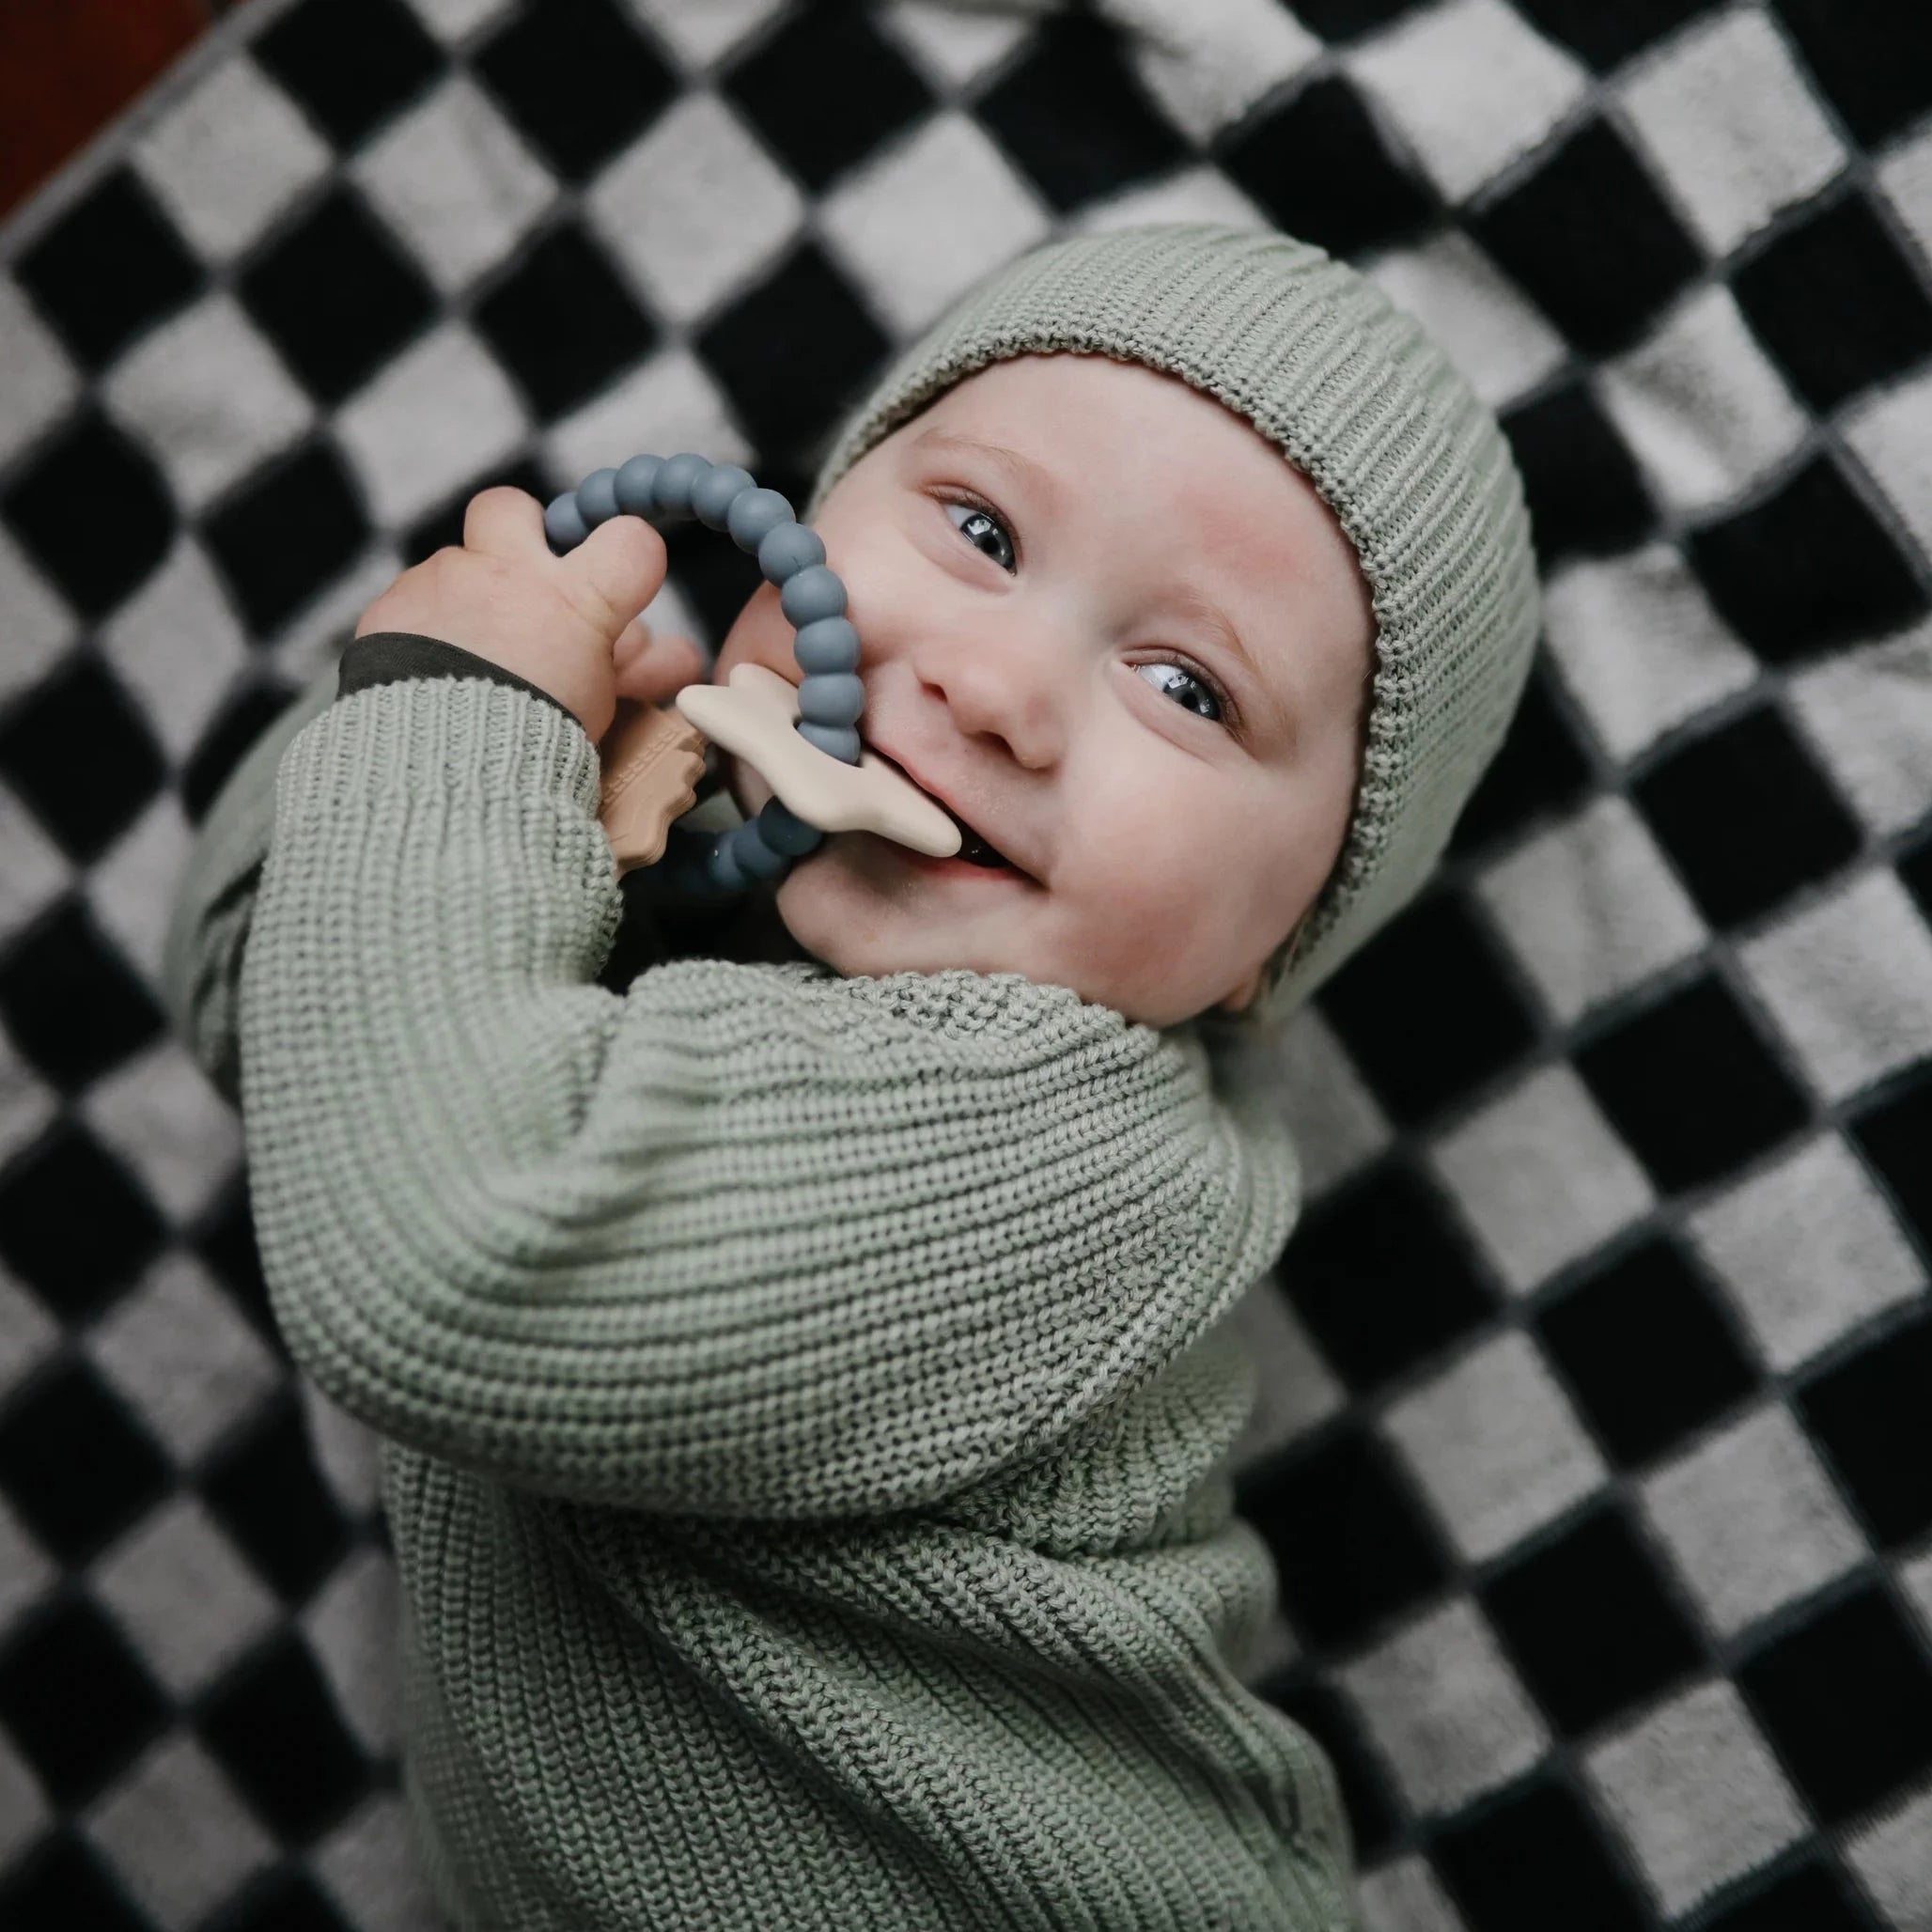 Baby holding teether with star charm in mouth. baby is wearing green hat and green knitted sweater. Baby is laying on black and white checkered blanket